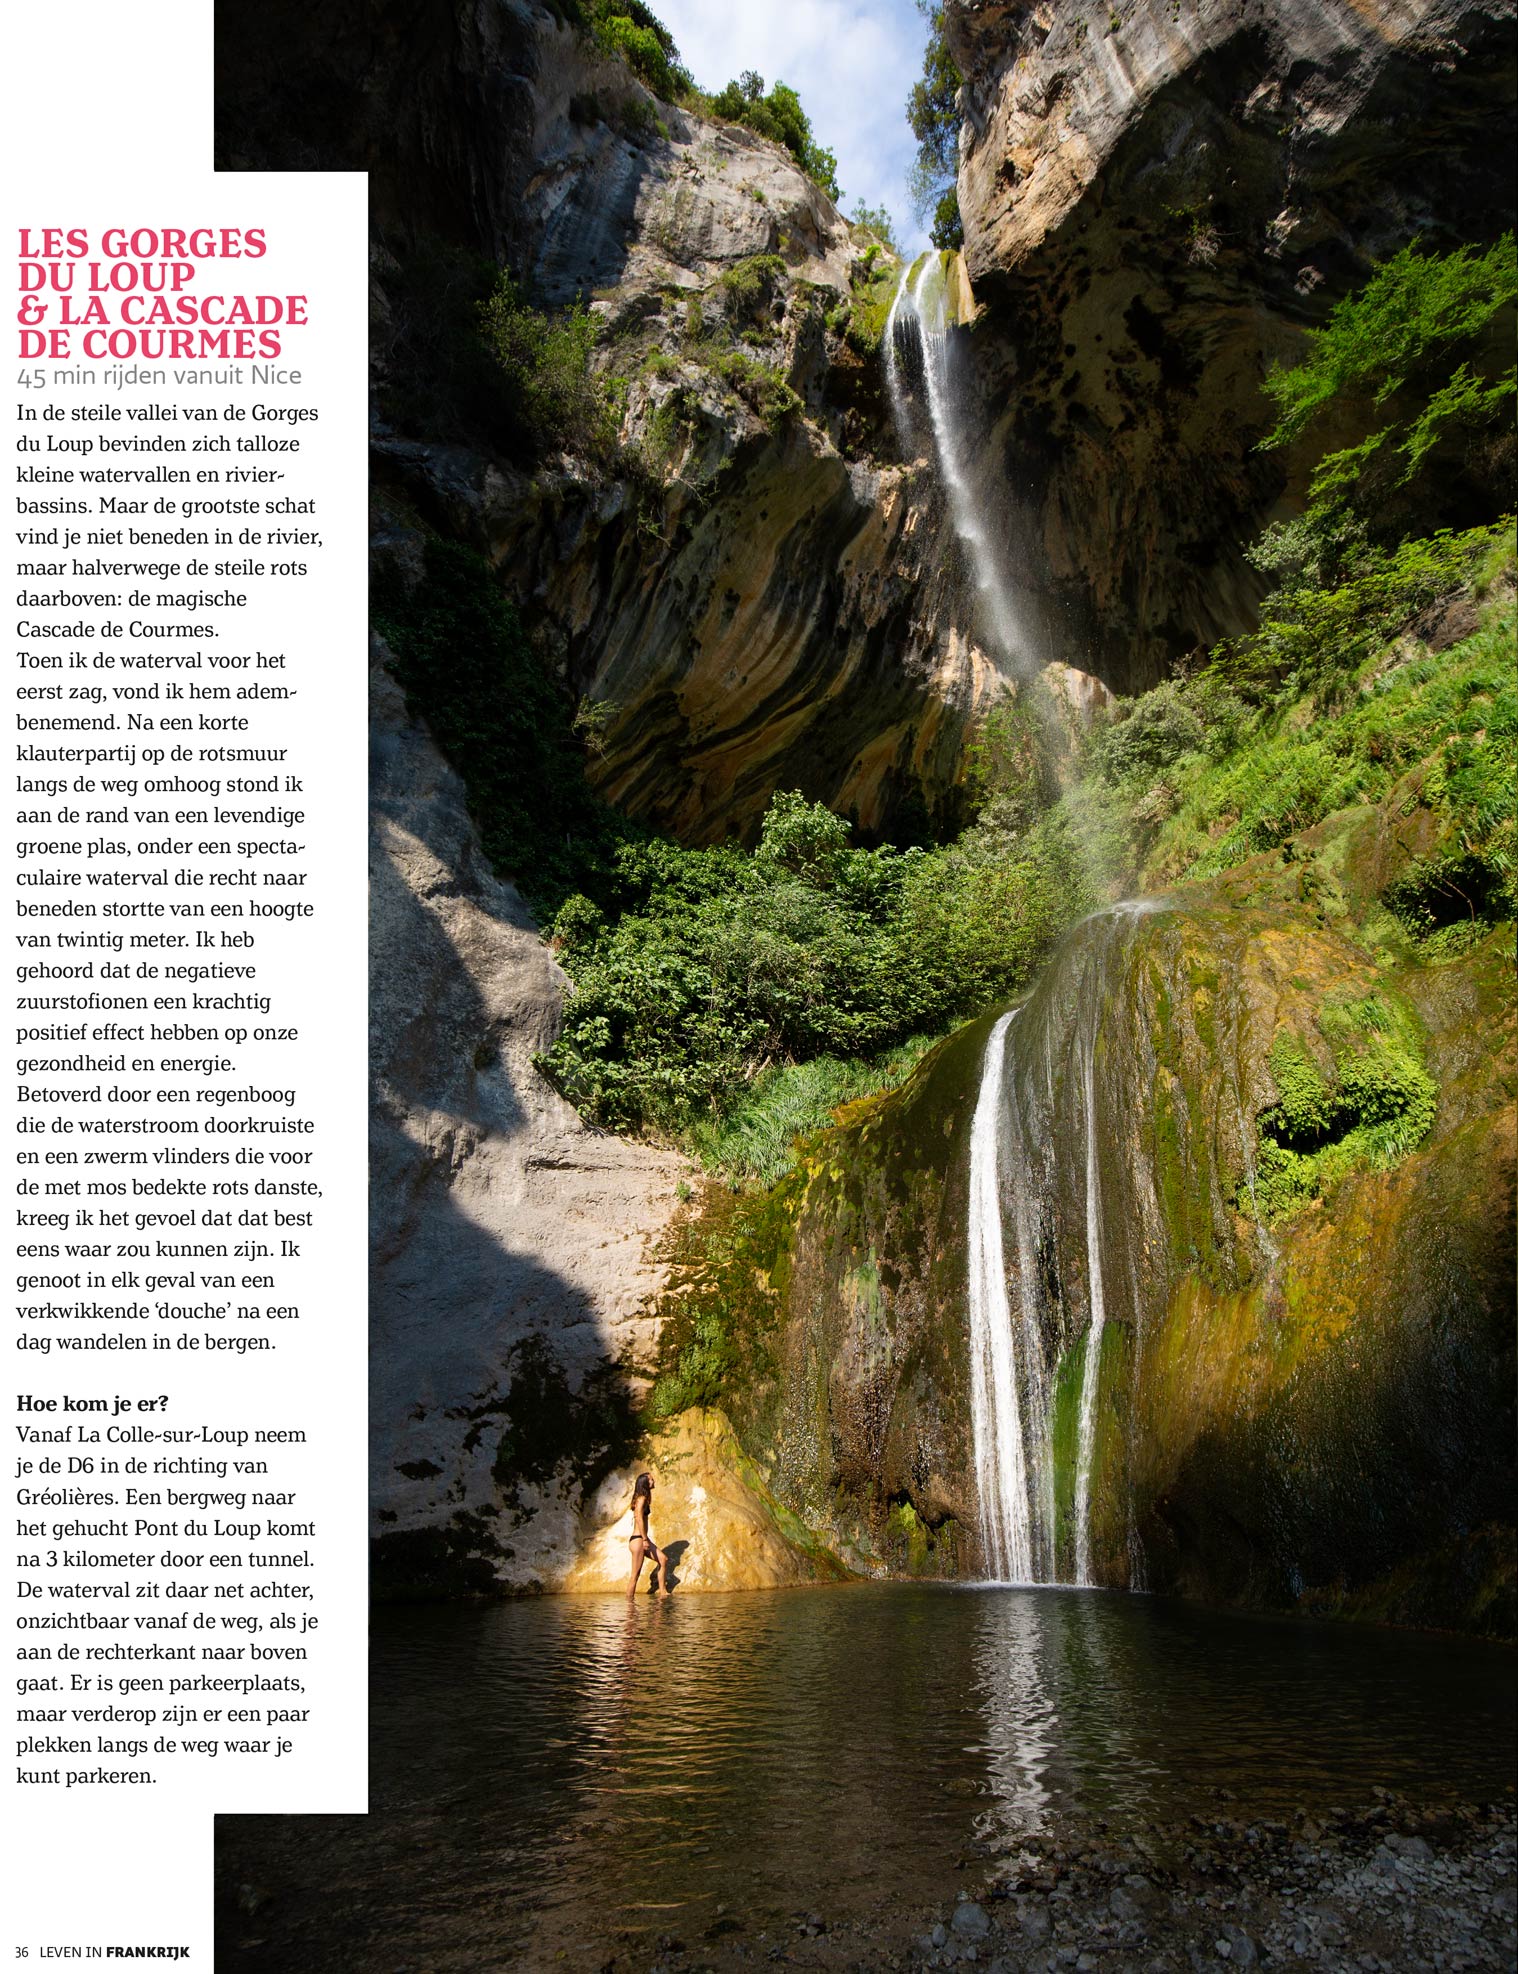 Single page magazine spread showing text and a photograph of a woman standing at the base of a high waterfall